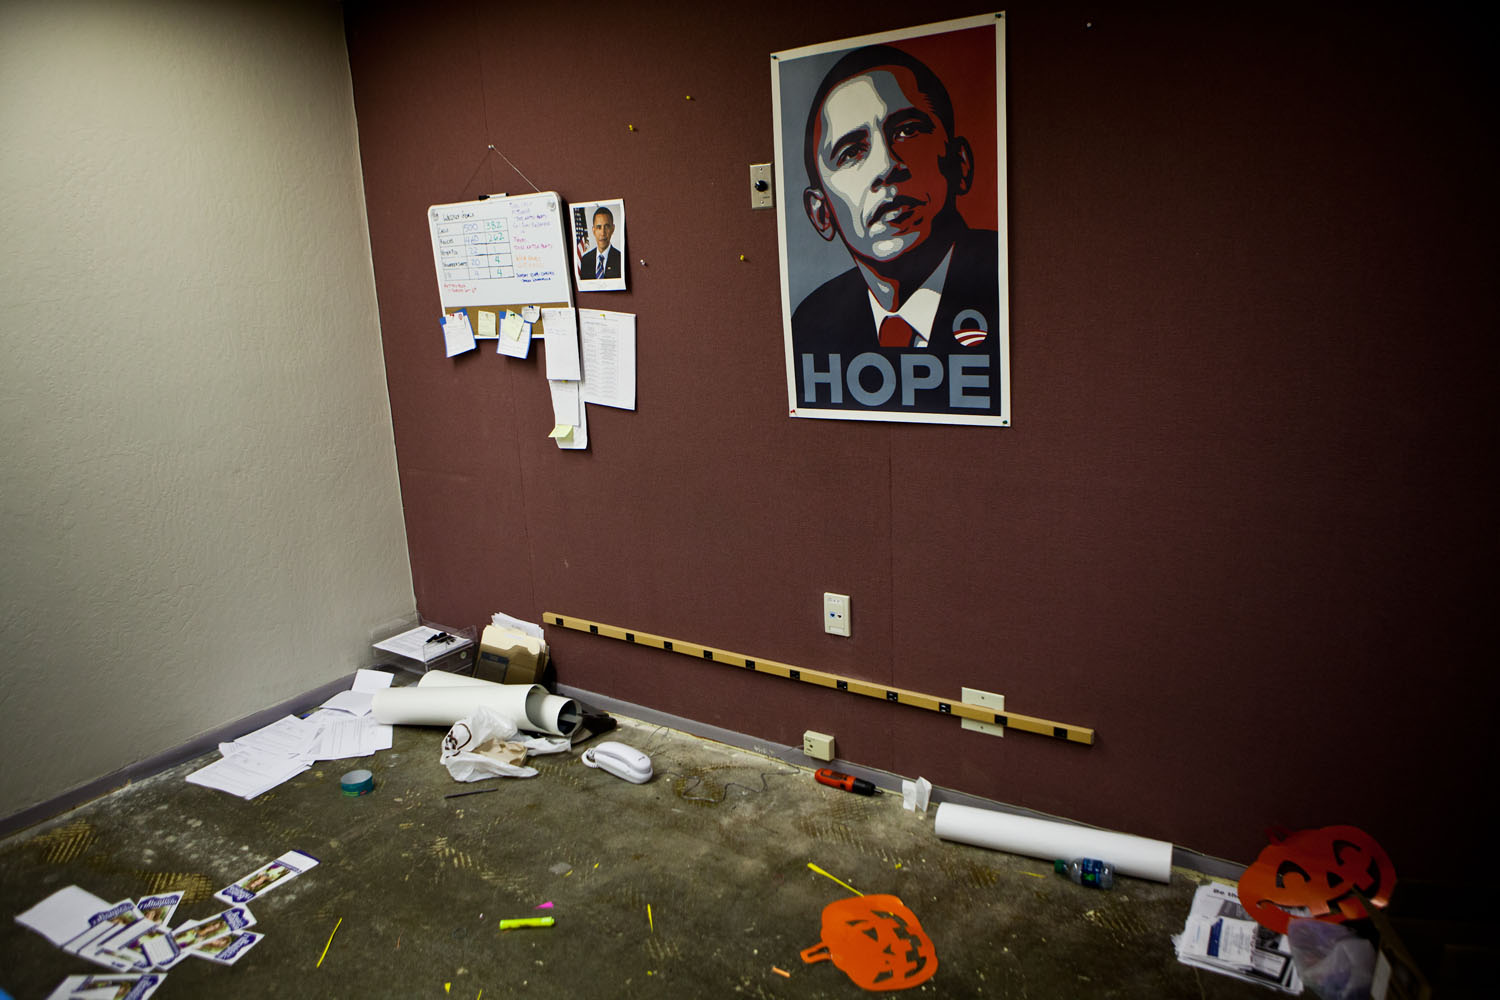 Image: Nov. 6, 2012. The Obama campaign headquarters already beginning to be cleared out as campaign staffers made their Election Day push in Reno, Nev.